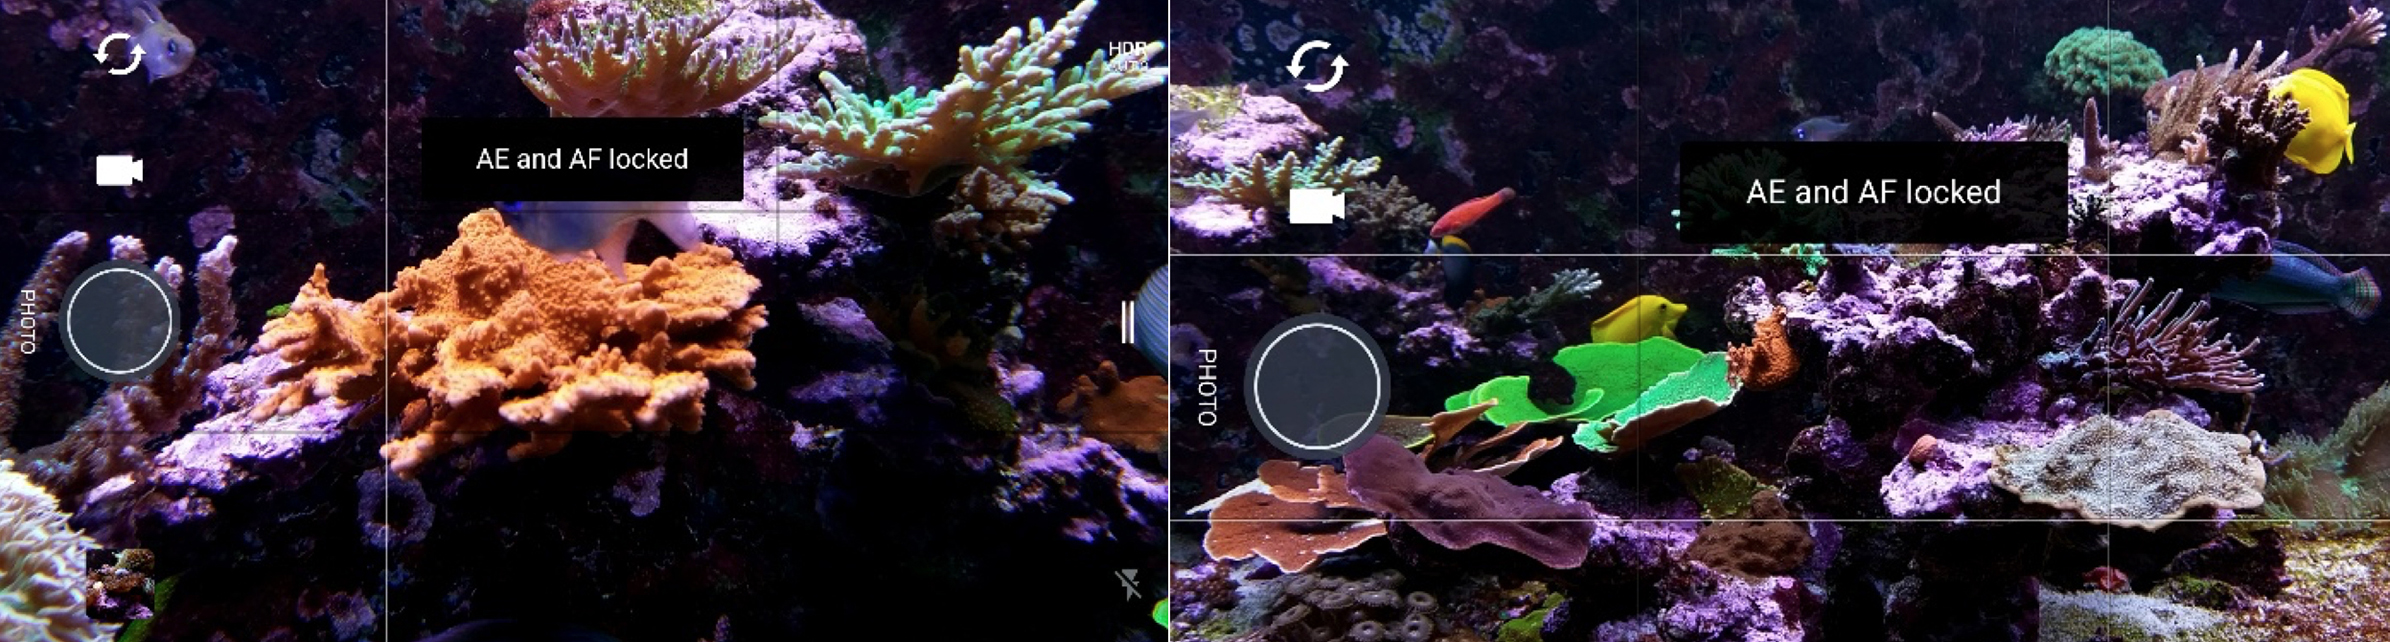 Your Guide to Aquarium Photography #5 - Taking Better Pictures with Mobile  Phone Cameras | REEF2REEF Saltwater and Reef Aquarium Forum